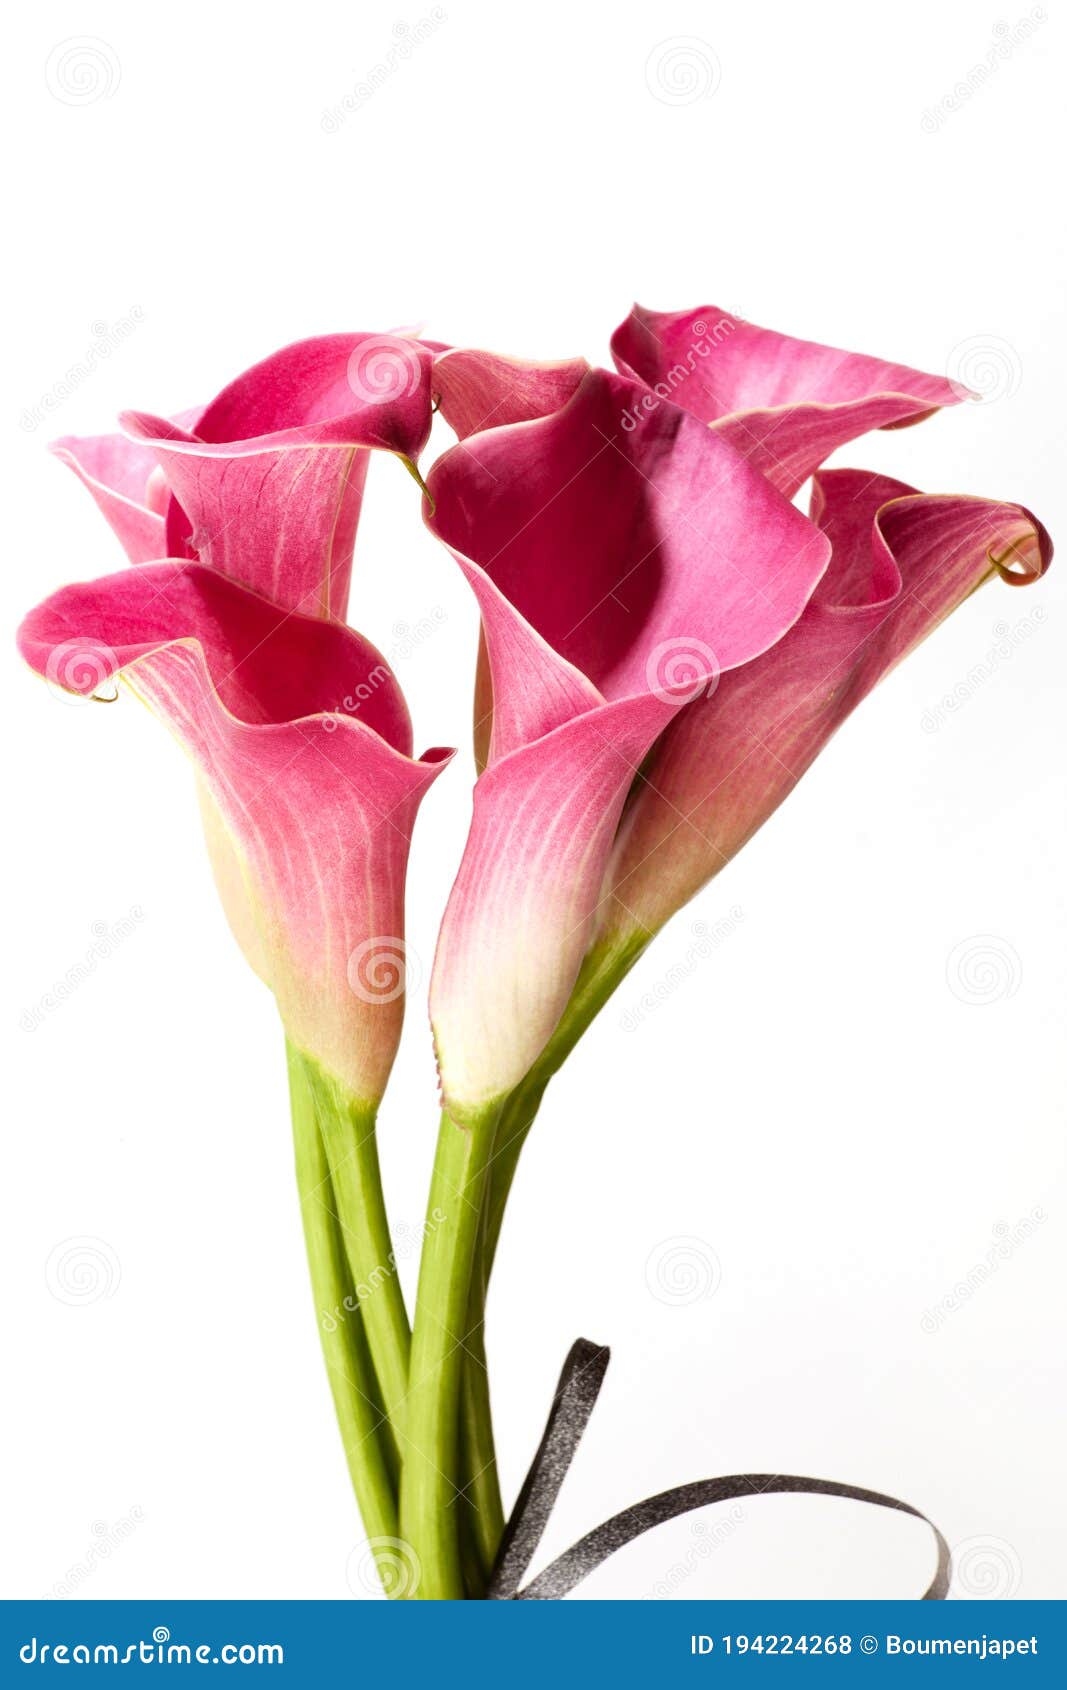 soft red calla flowers  on white background.